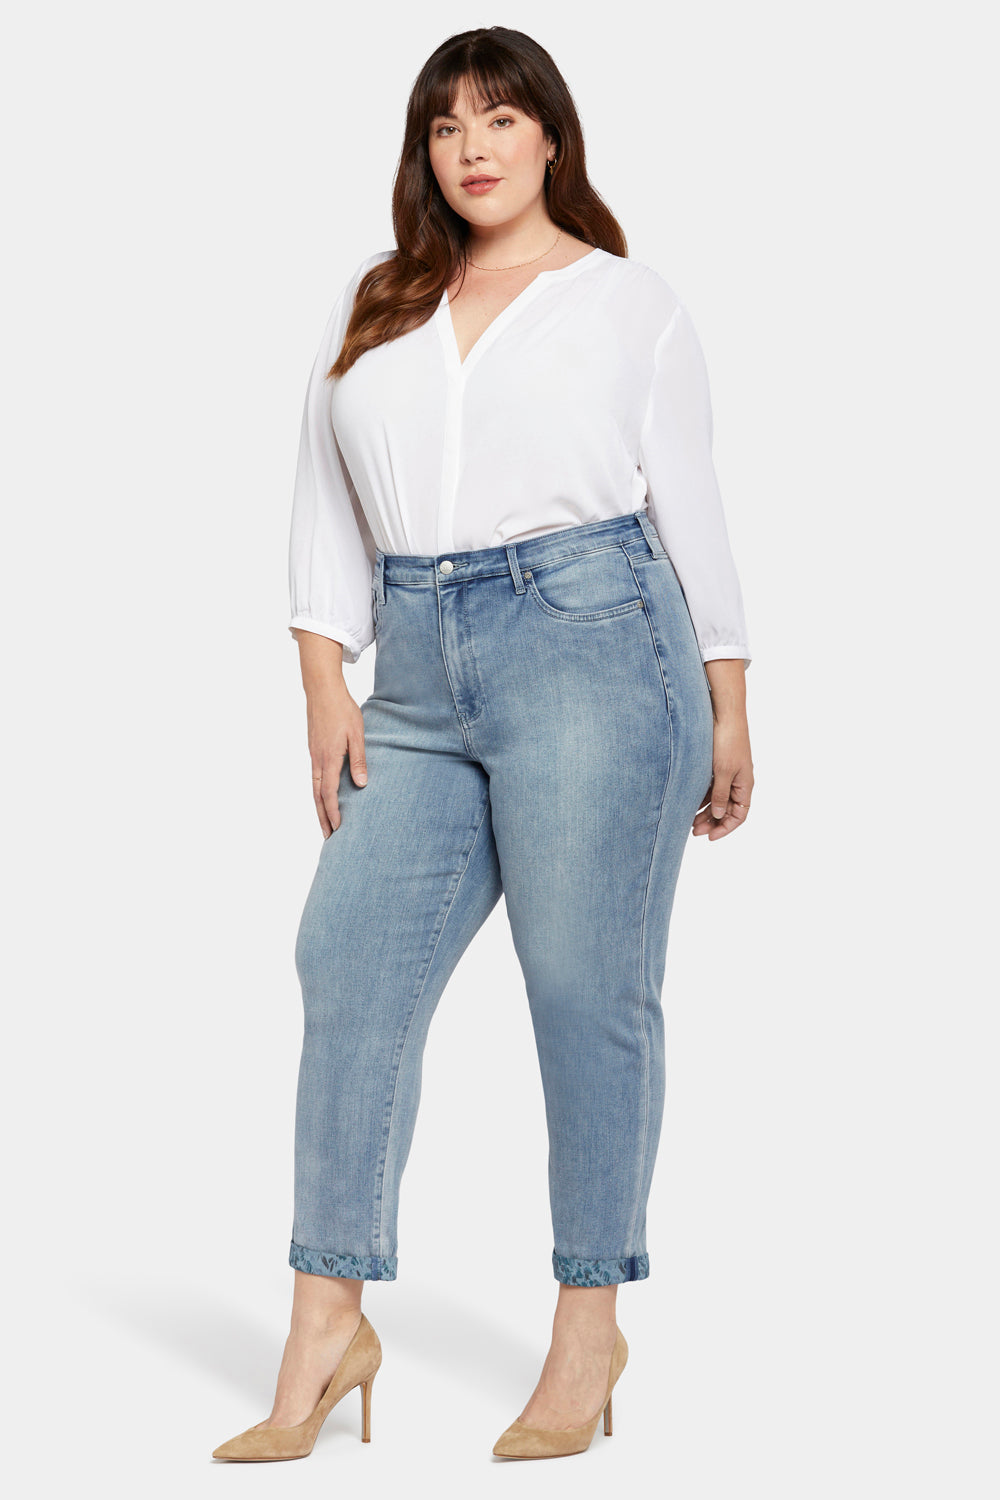 NYDJ Margot Girlfriend Jeans In Plus Size With Printed Roll Cuffs - Thistle Falls